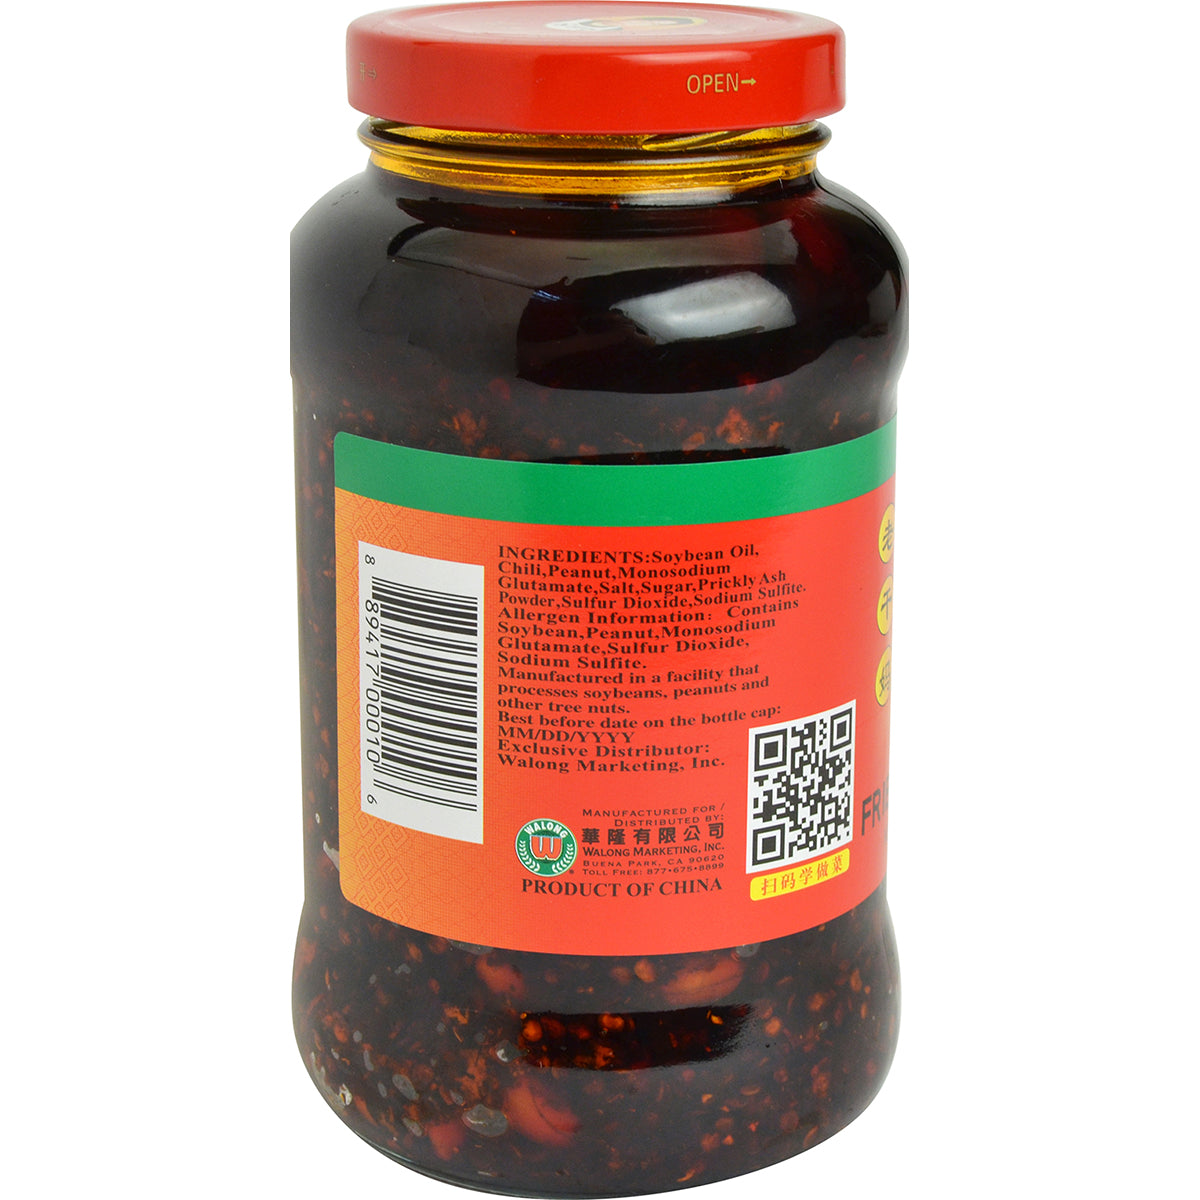 Lao Gan Ma Laoganma Fried Chili in Oil Value Pack - 730g